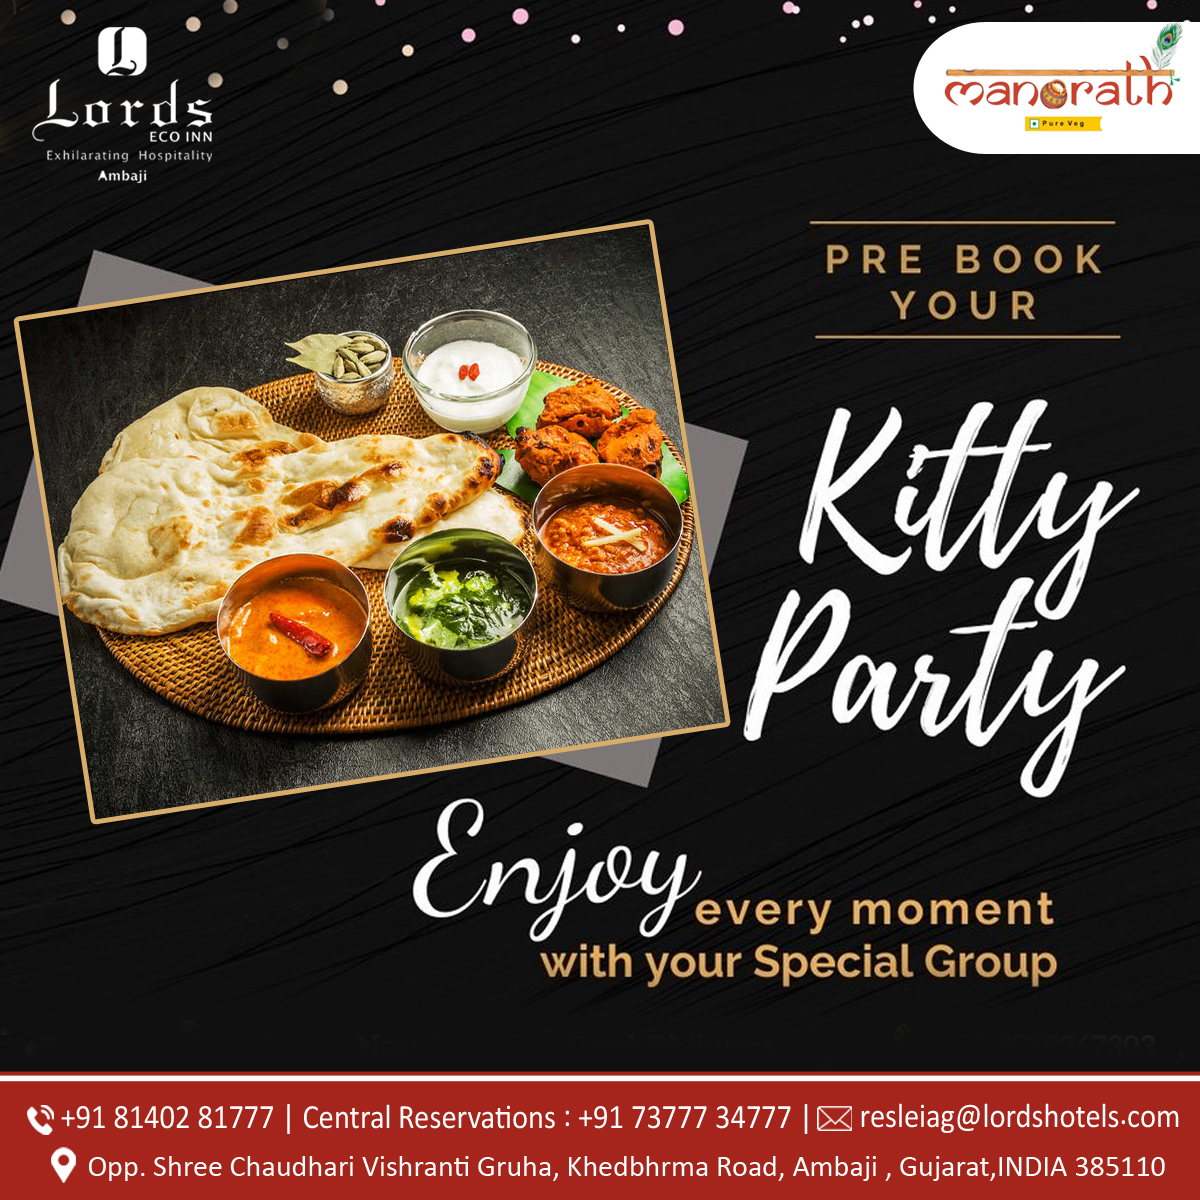 Let the celebration be grand!! Be it any event we will make it a grand one for you !

#kittyparty #ladiesparty #kittypartygames #KittyPartyFun #kittypartyvenue